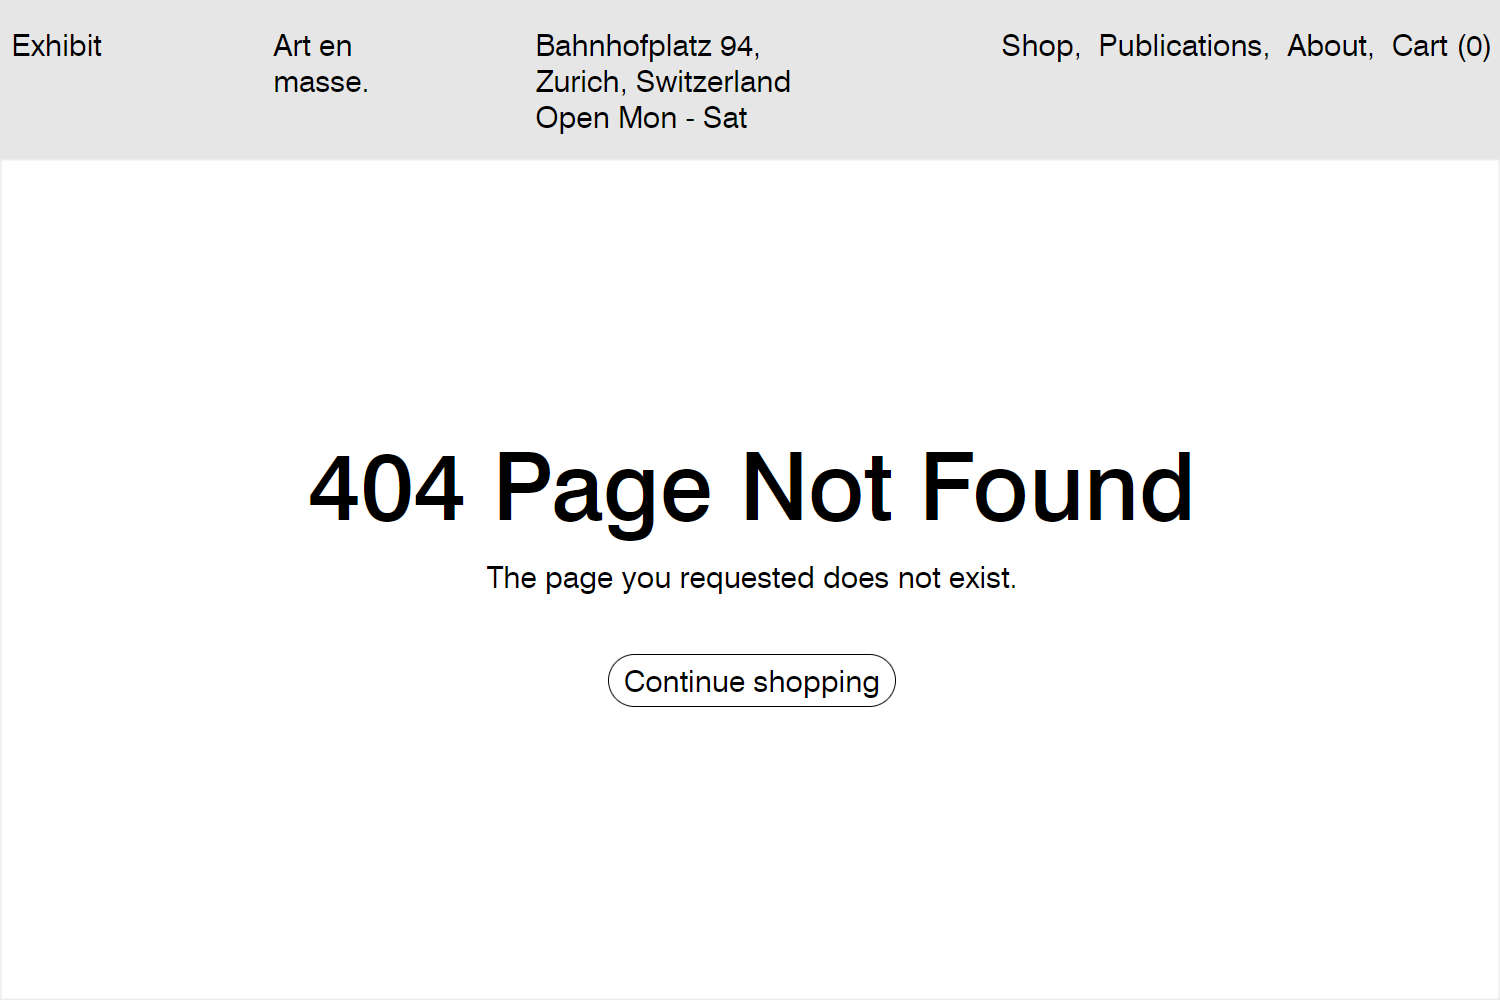 An example main 404 section on a store's 404 page.